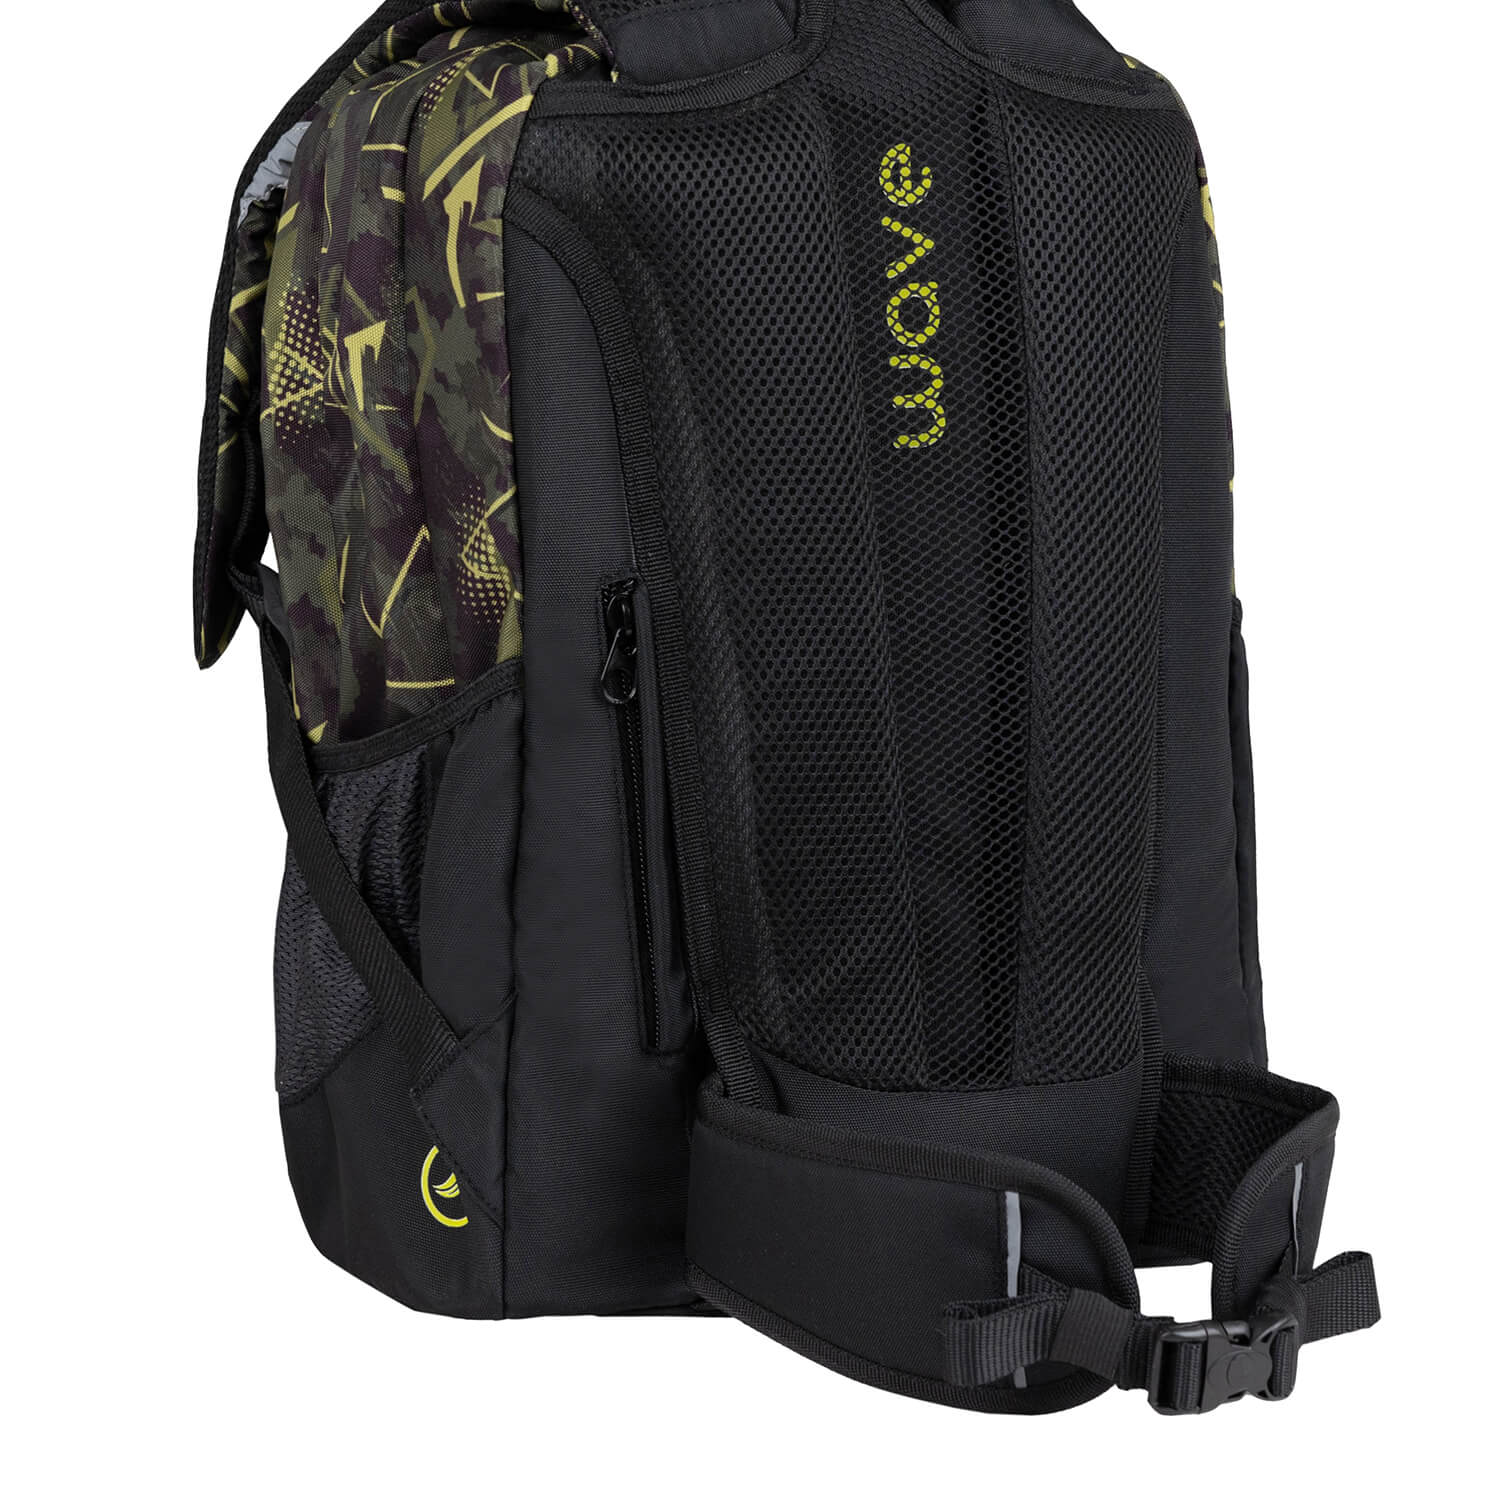 Wave Infinity Move Waves Bold school backpack